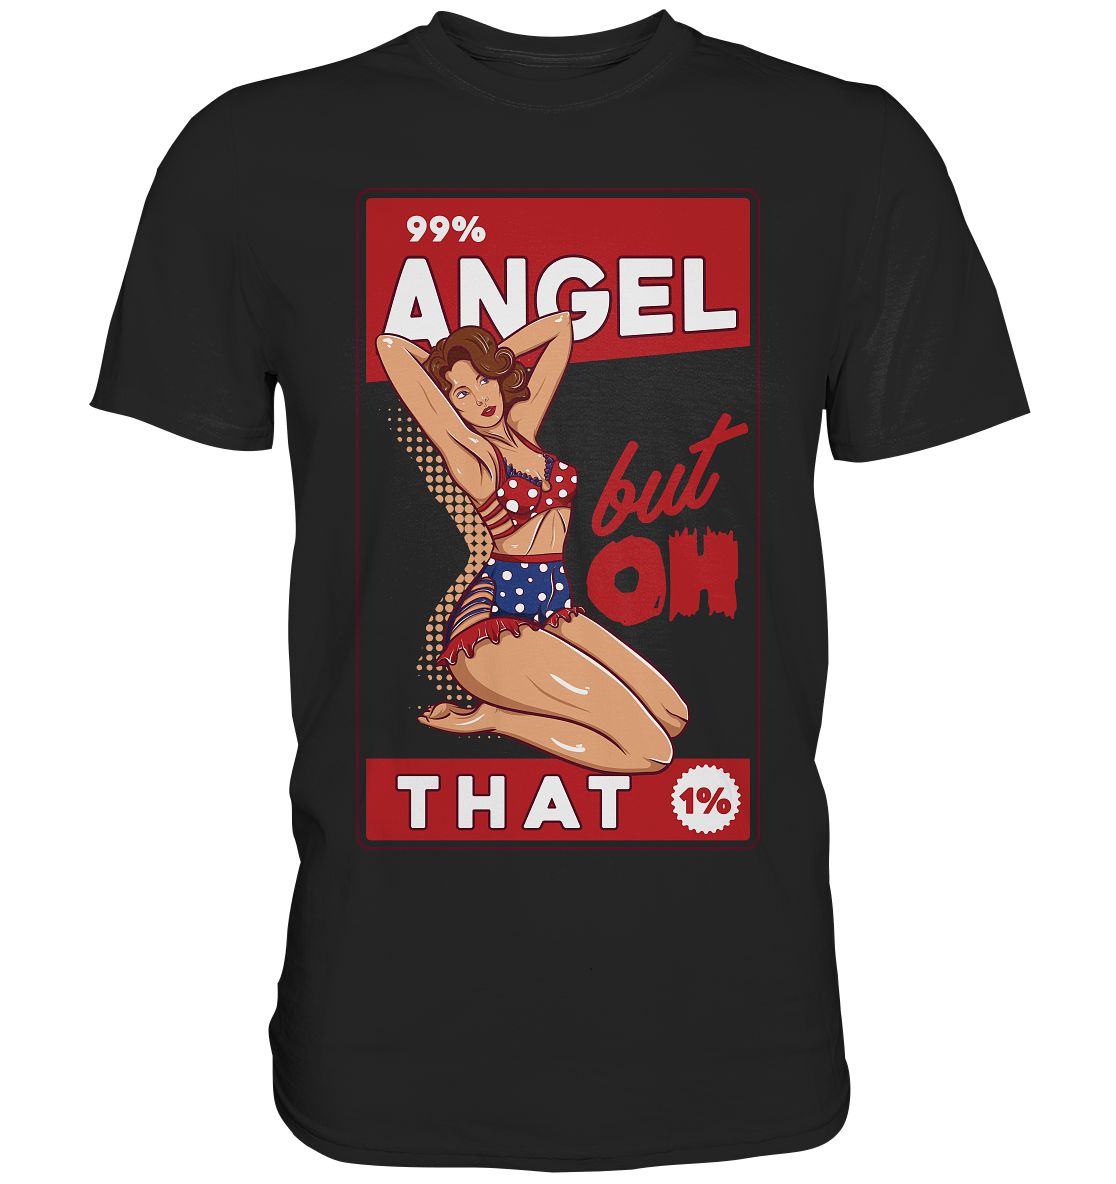 99% Angel but Oh that 1%. PinUp - Premium Shirt